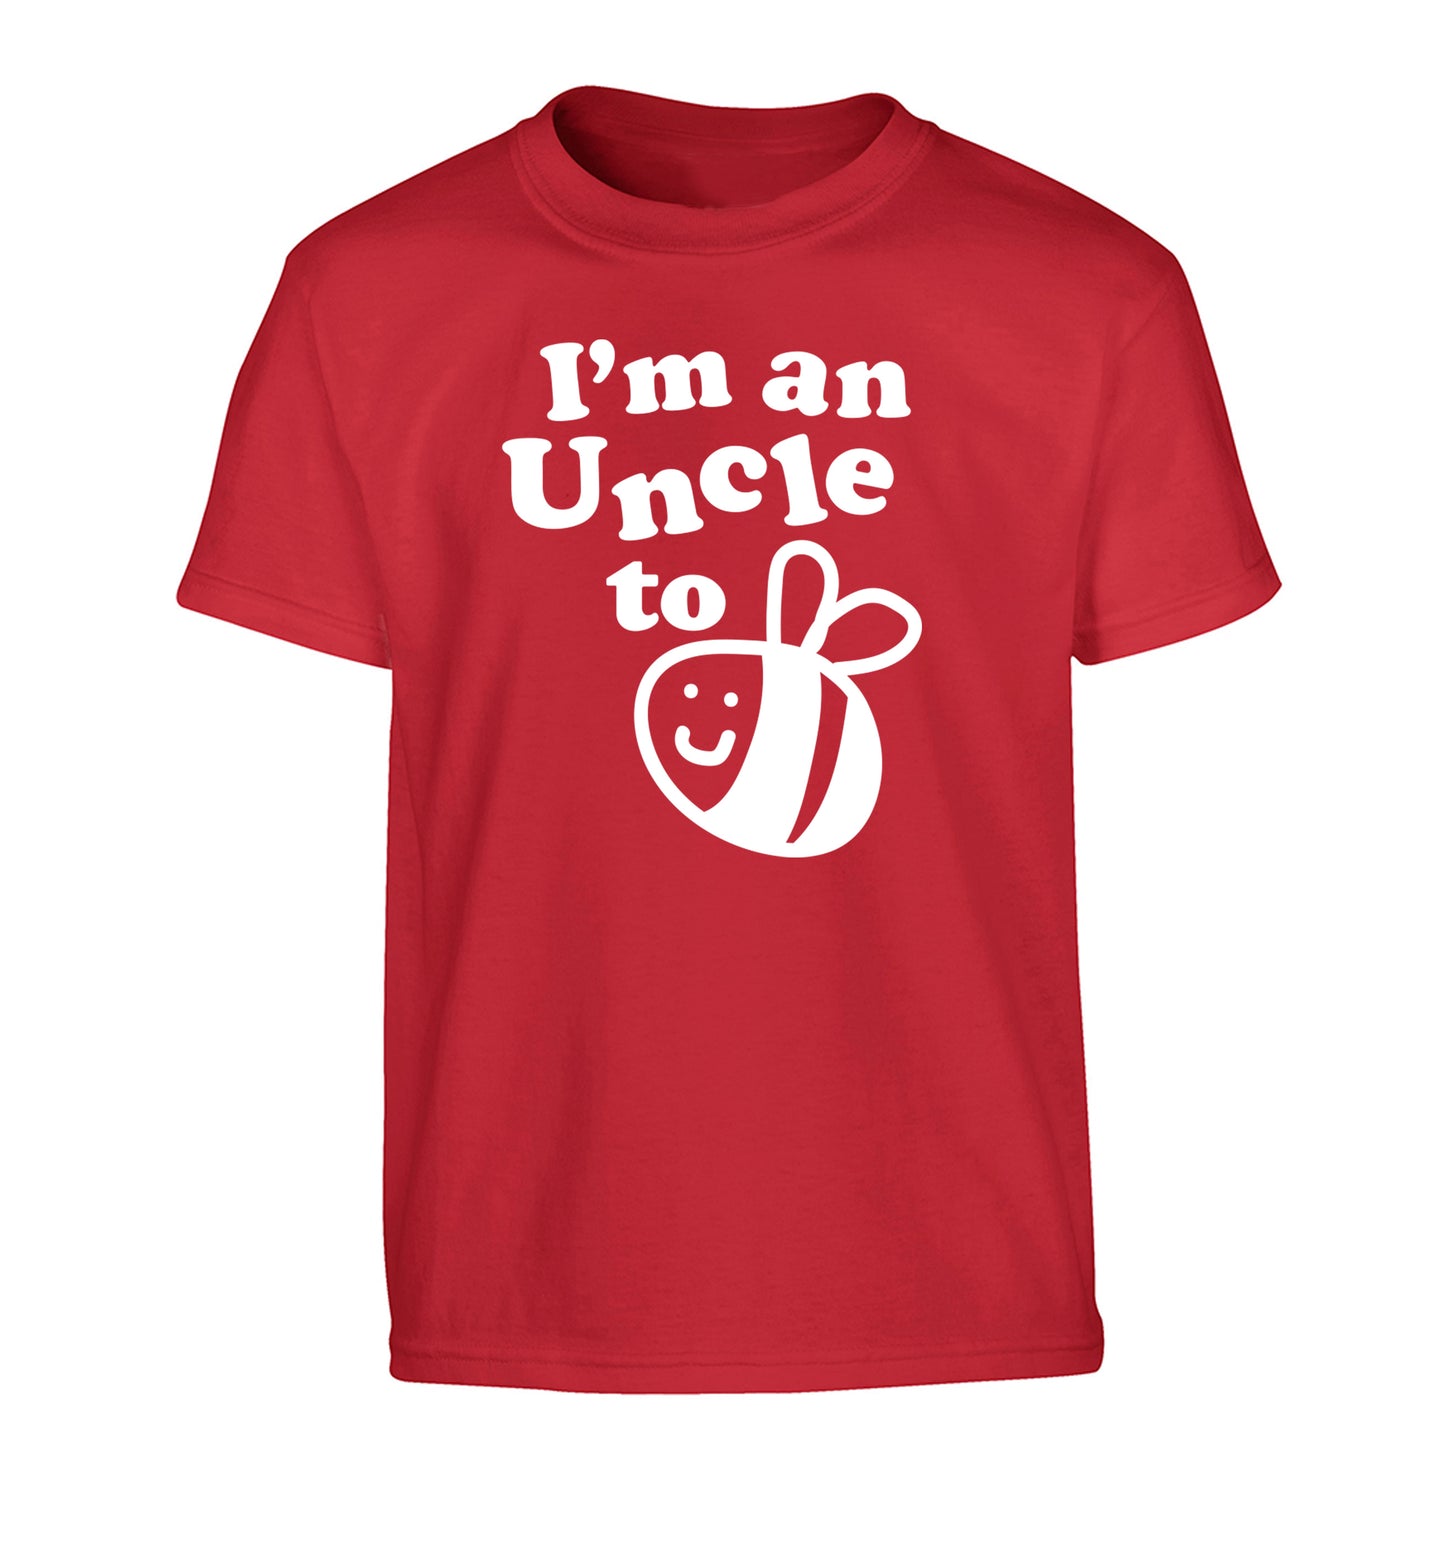 I'm an uncle to be Children's red Tshirt 12-14 Years